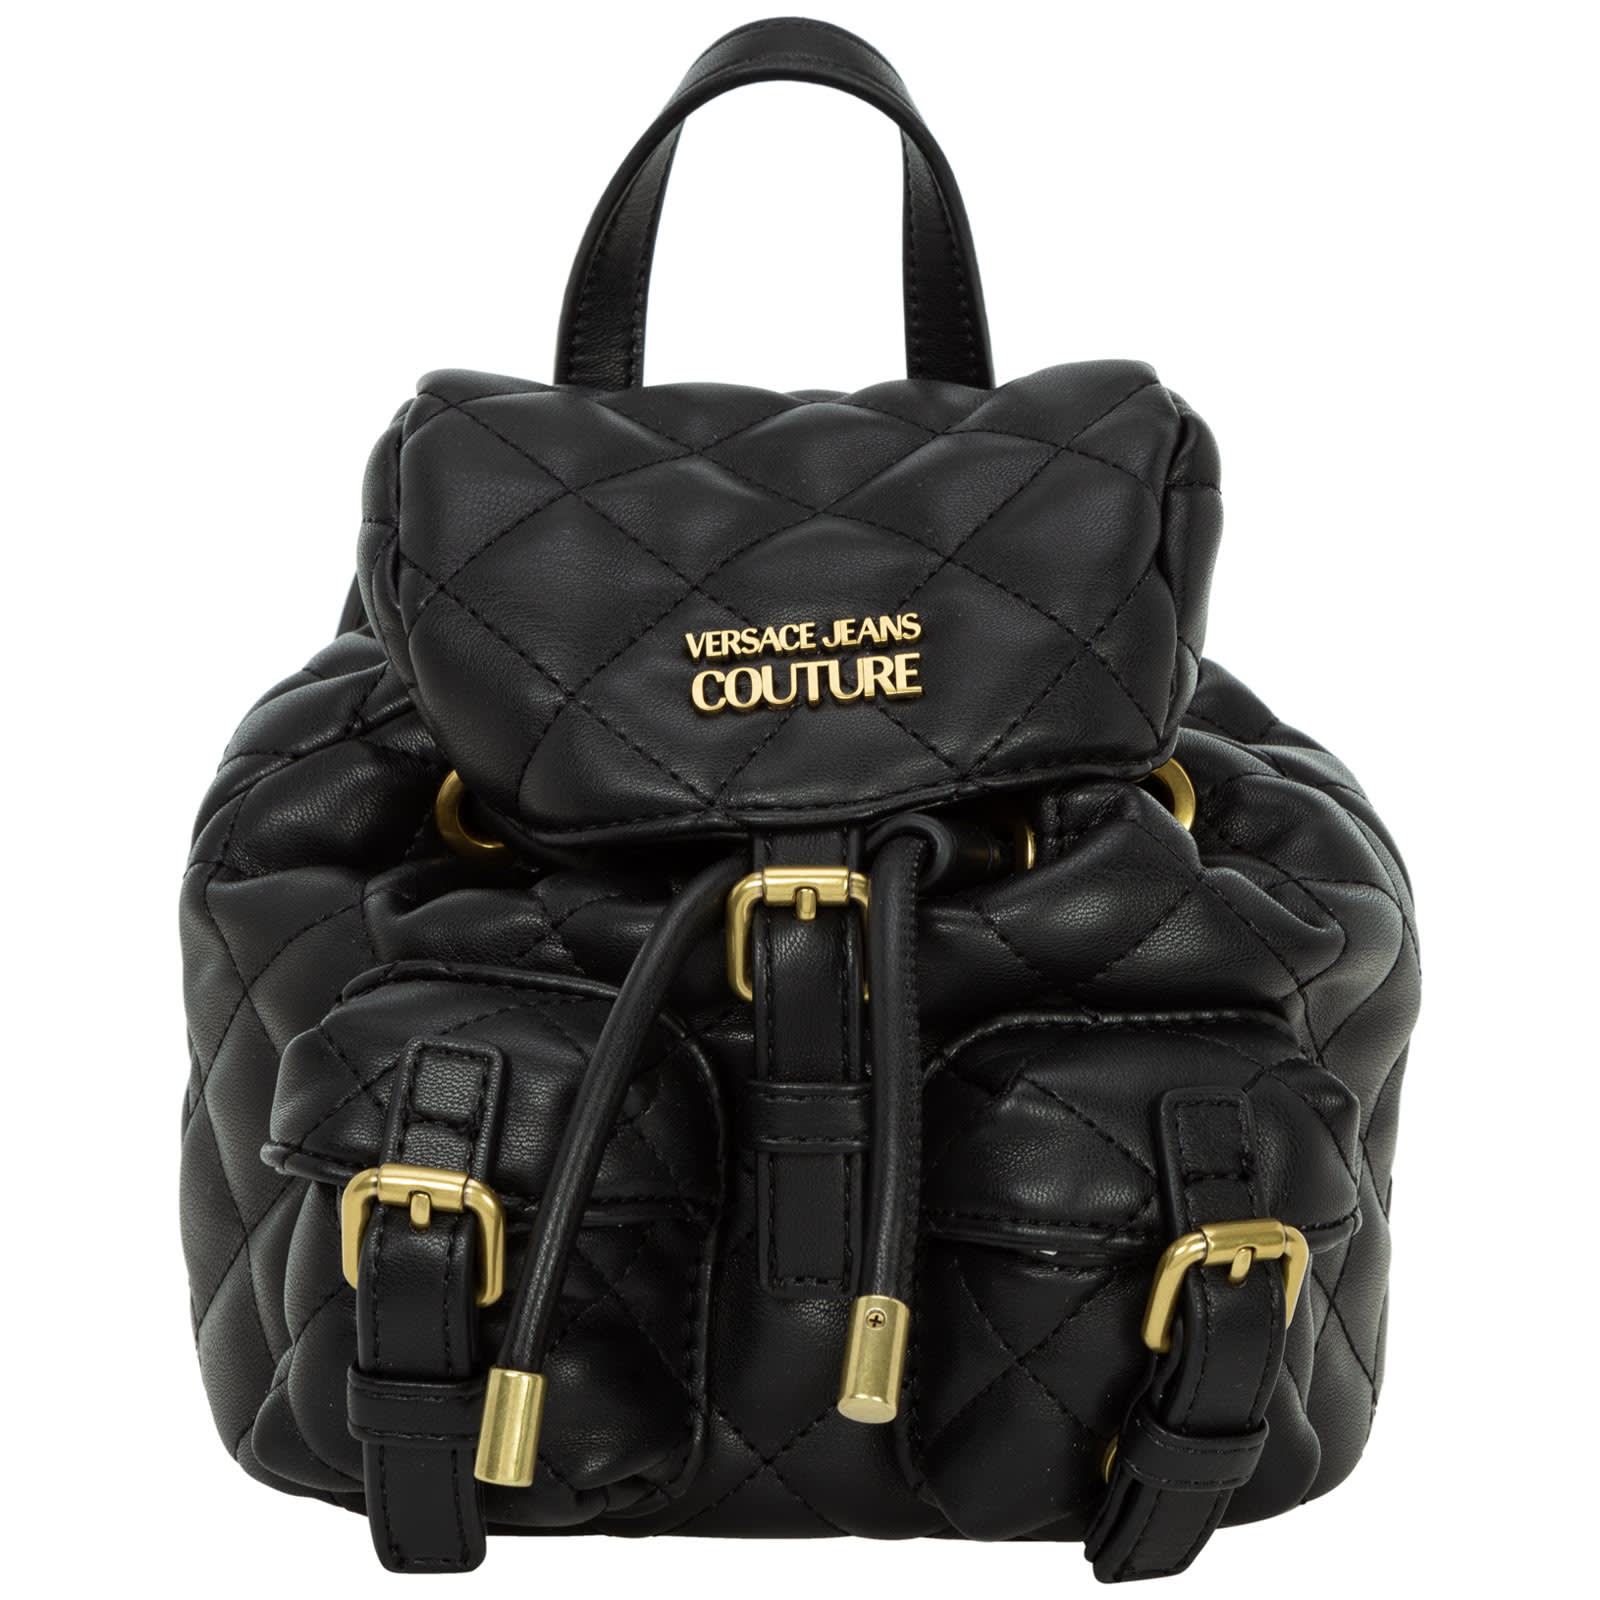 Versace Jeans Couture Garland Crossbody Bags